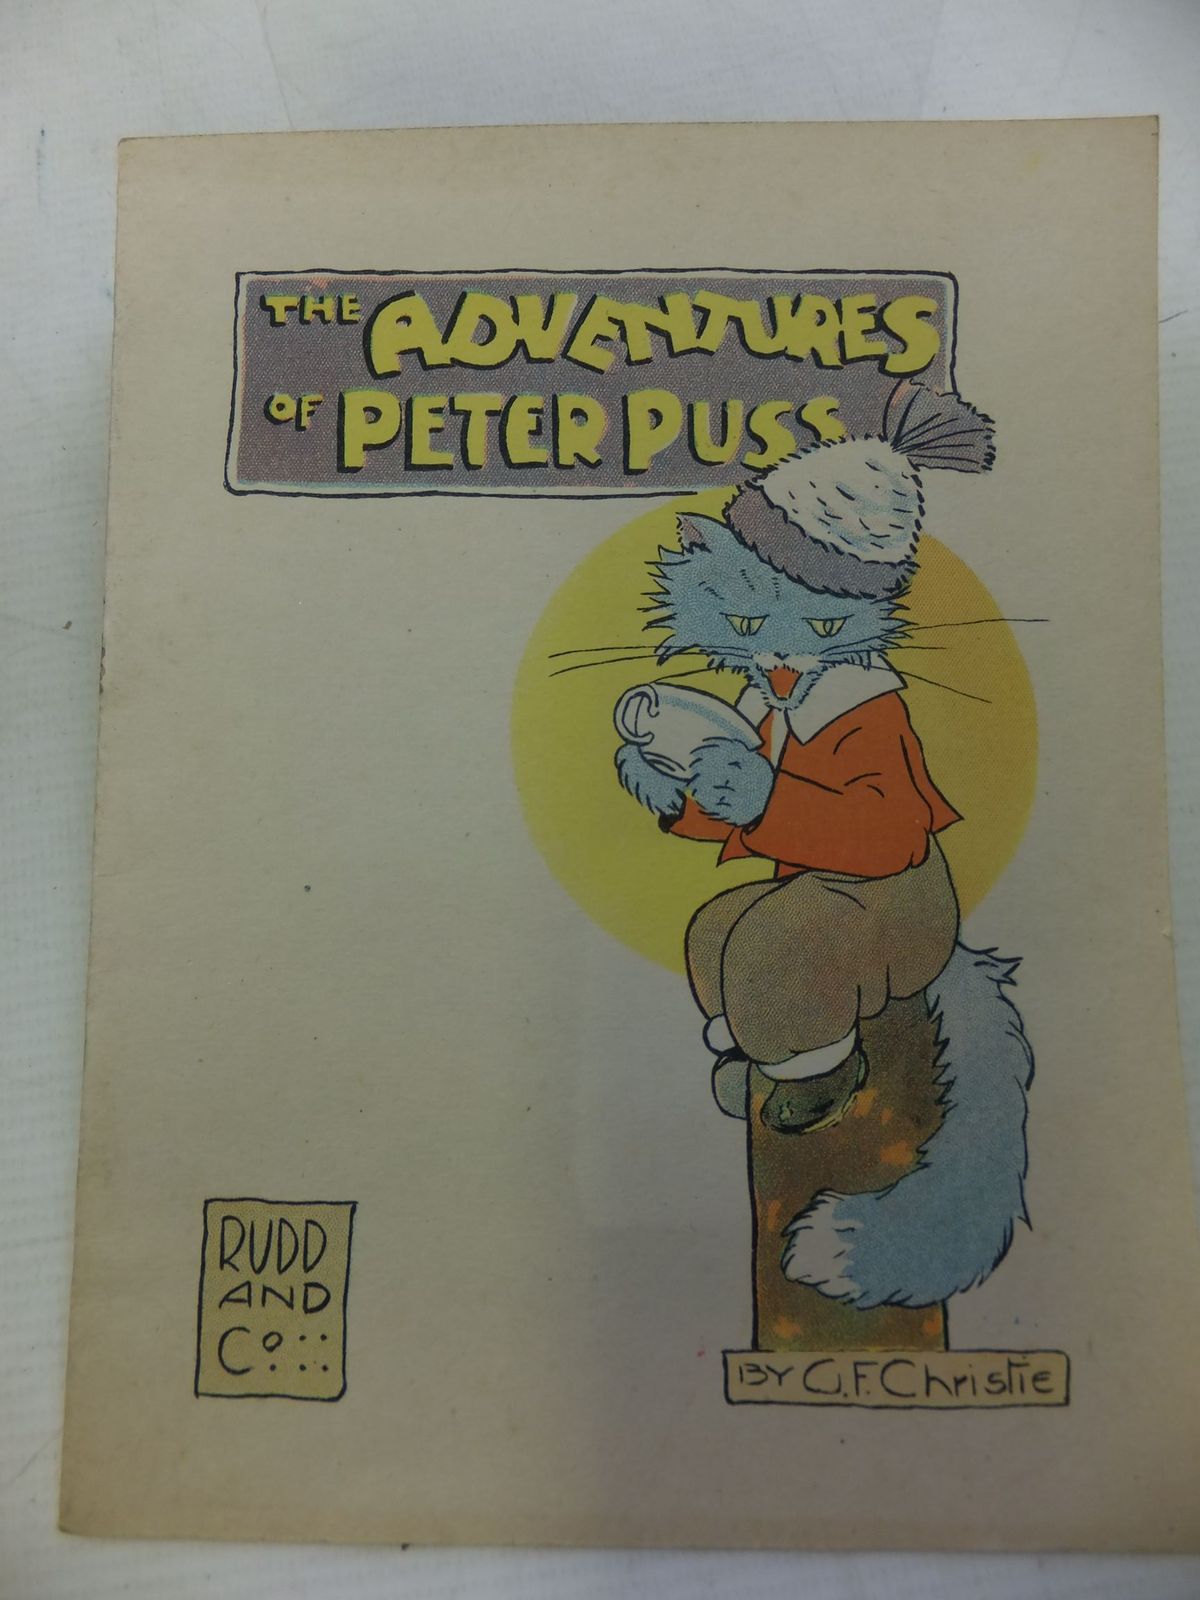 Photo of THE ADVENTURES OF PETER PUSS written by Christie, G.F. illustrated by Christie, G.F. published by Rudd &amp; Co. (STOCK CODE: 2114317)  for sale by Stella & Rose's Books